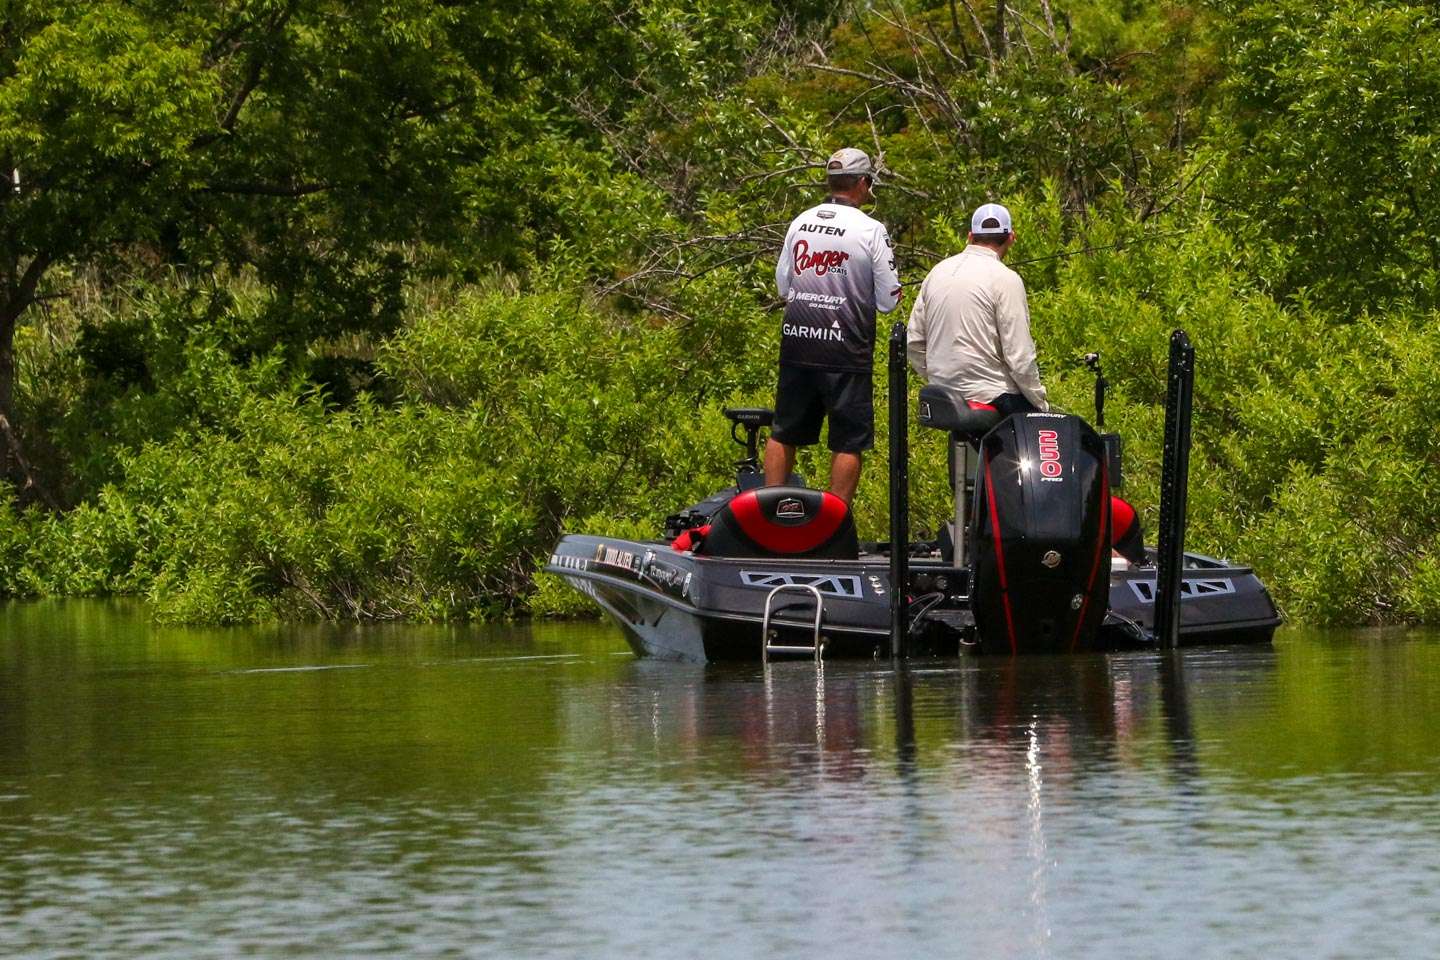 See the Classic anglers take on the second day of the 2021 Academy Sports + Outdoors Bassmaster Classic presented by Huk! 